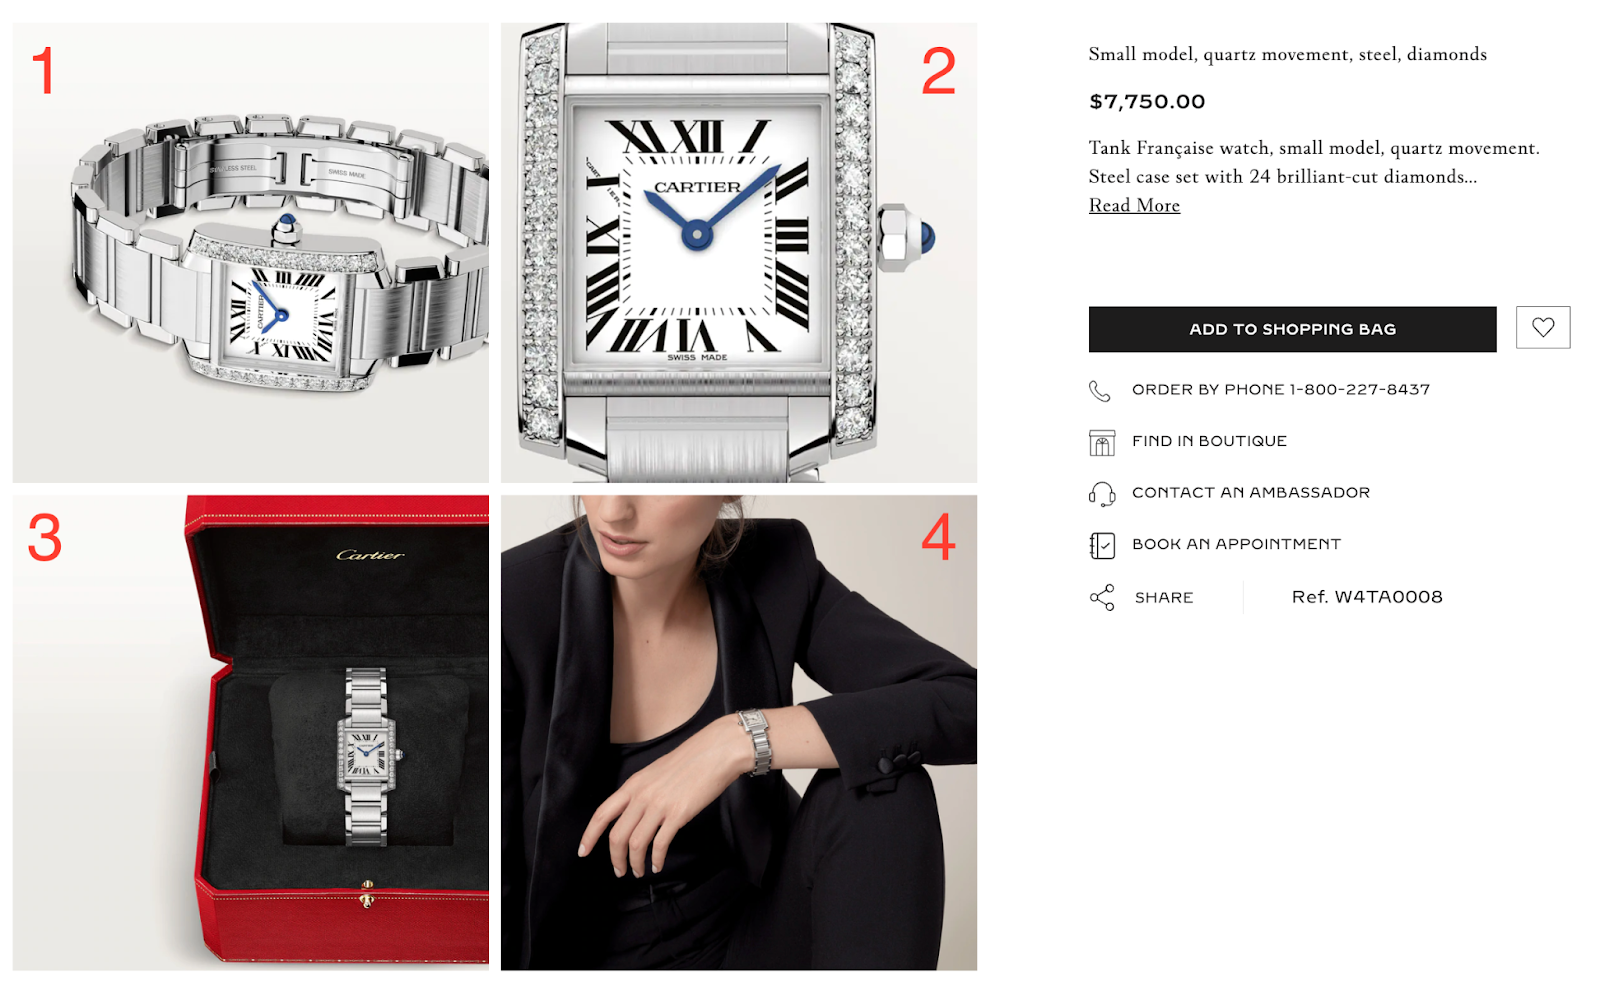 Example of a luxury watch product page.